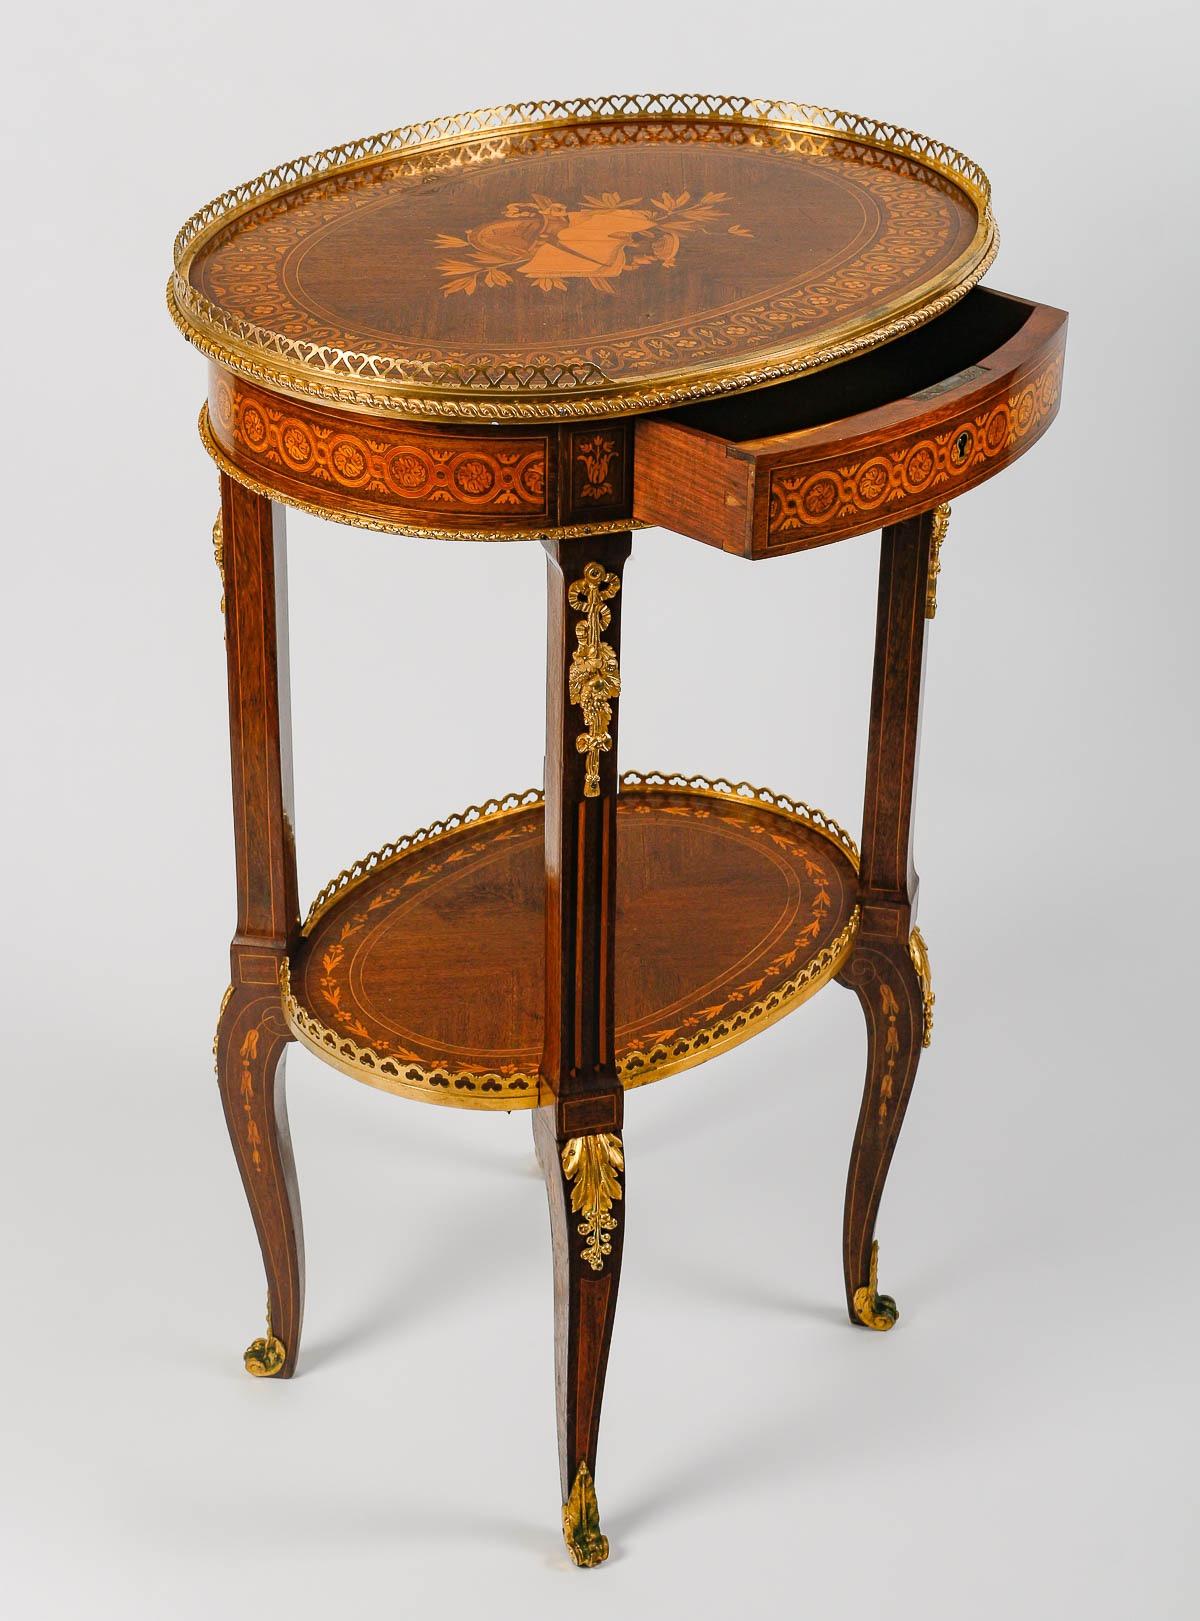 A very good quality 19th century French charming two-tier side table with a single frieze drawer
parquetry inlaid, designed with Allegories of Geography and Astronomy, with pierced three-quarter gallery surround, above a foliate and loop frieze, the